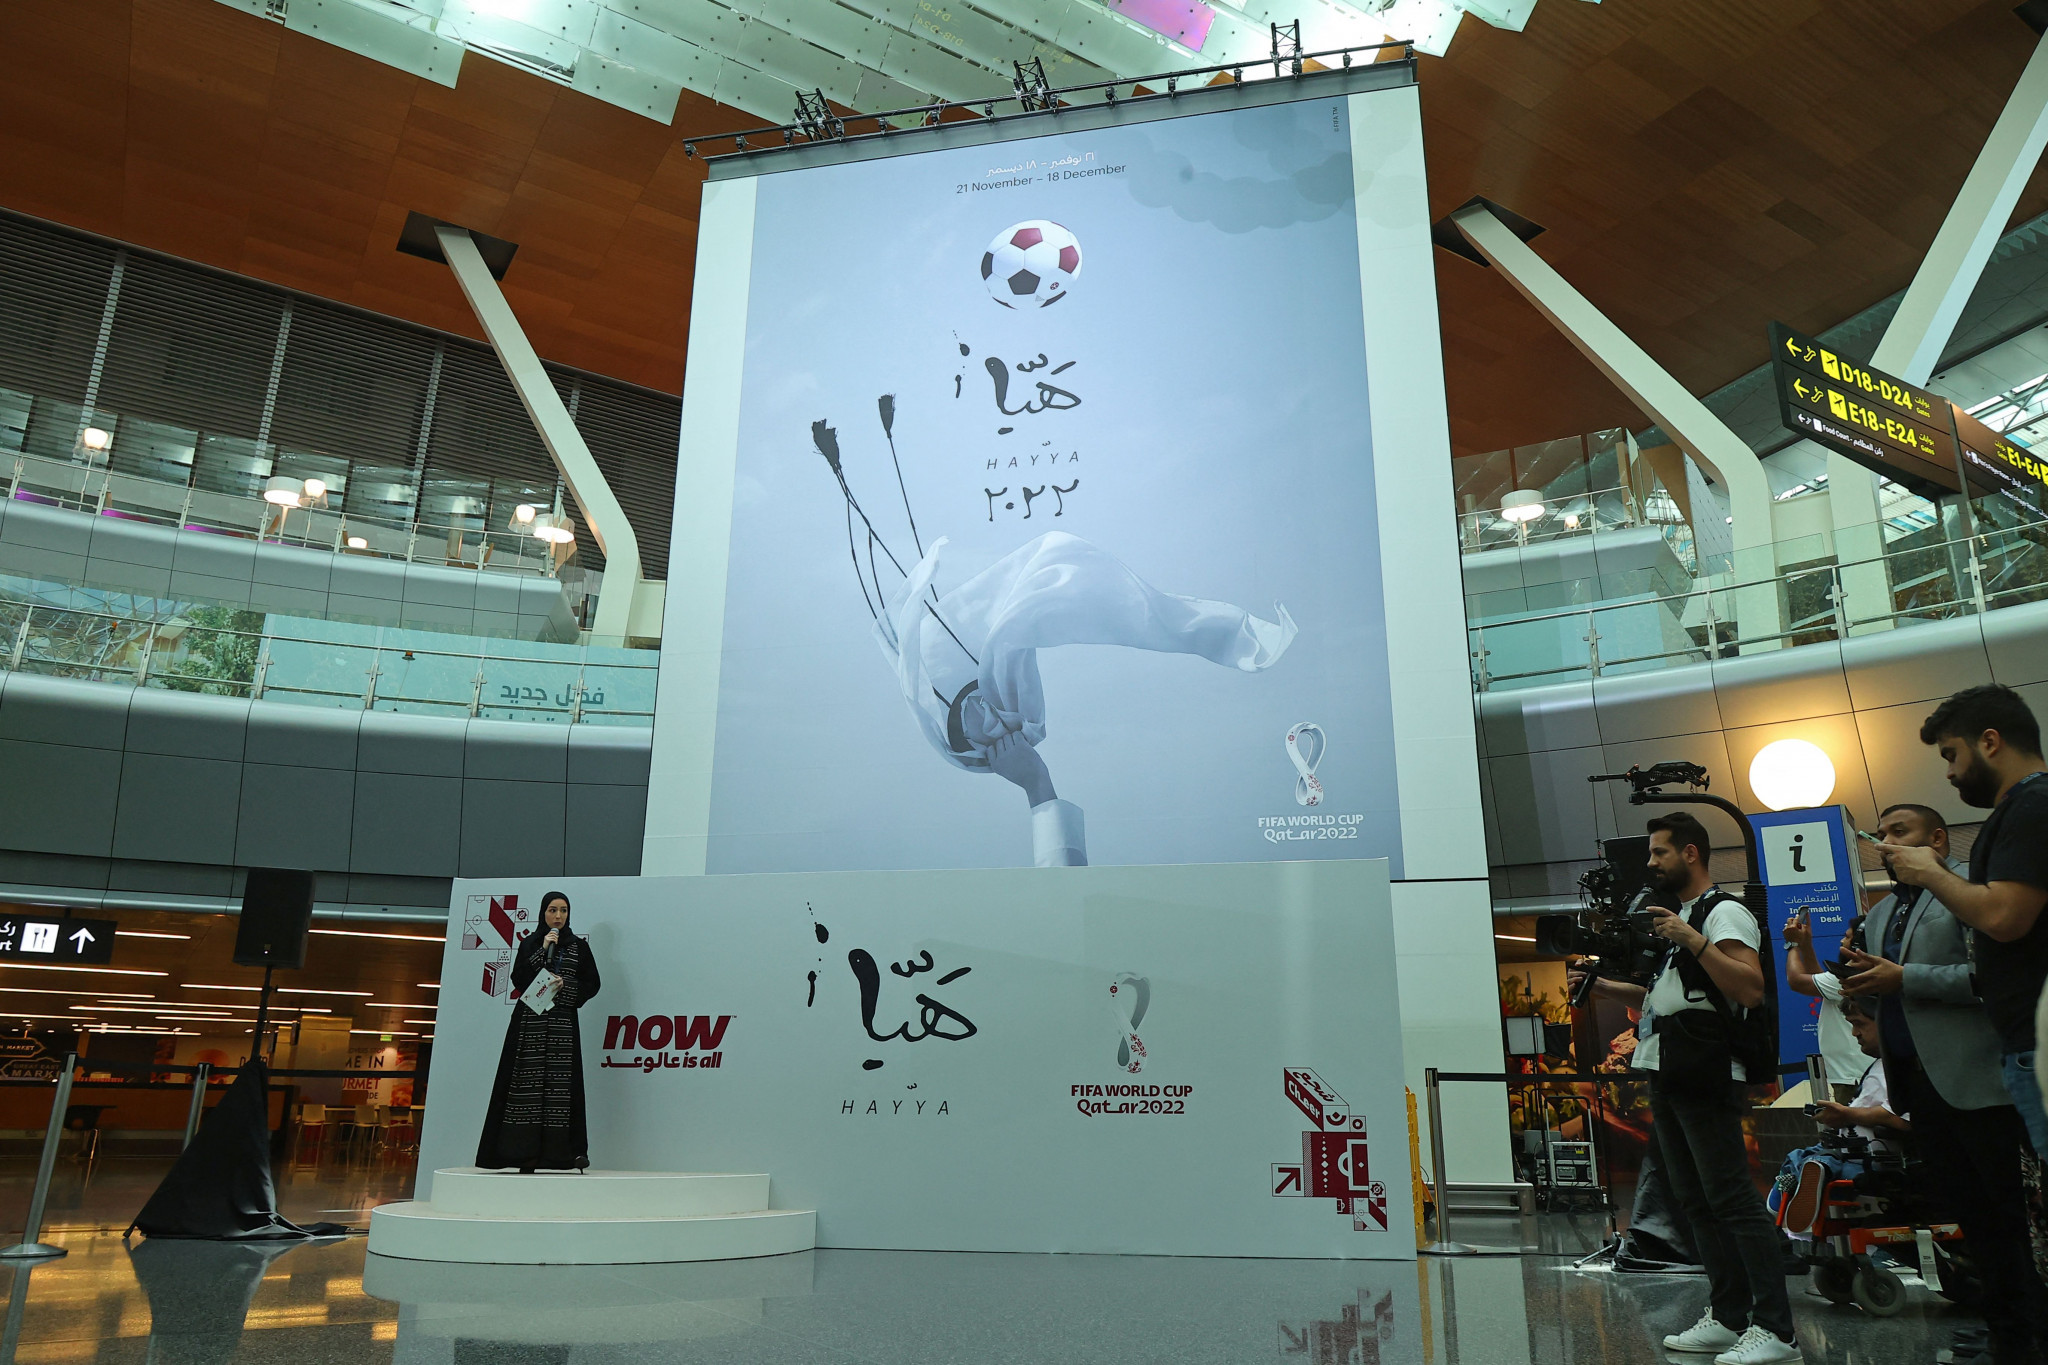 The World Cup posters were displayed at the Hamad International Airport in Doha today ©Getty Images